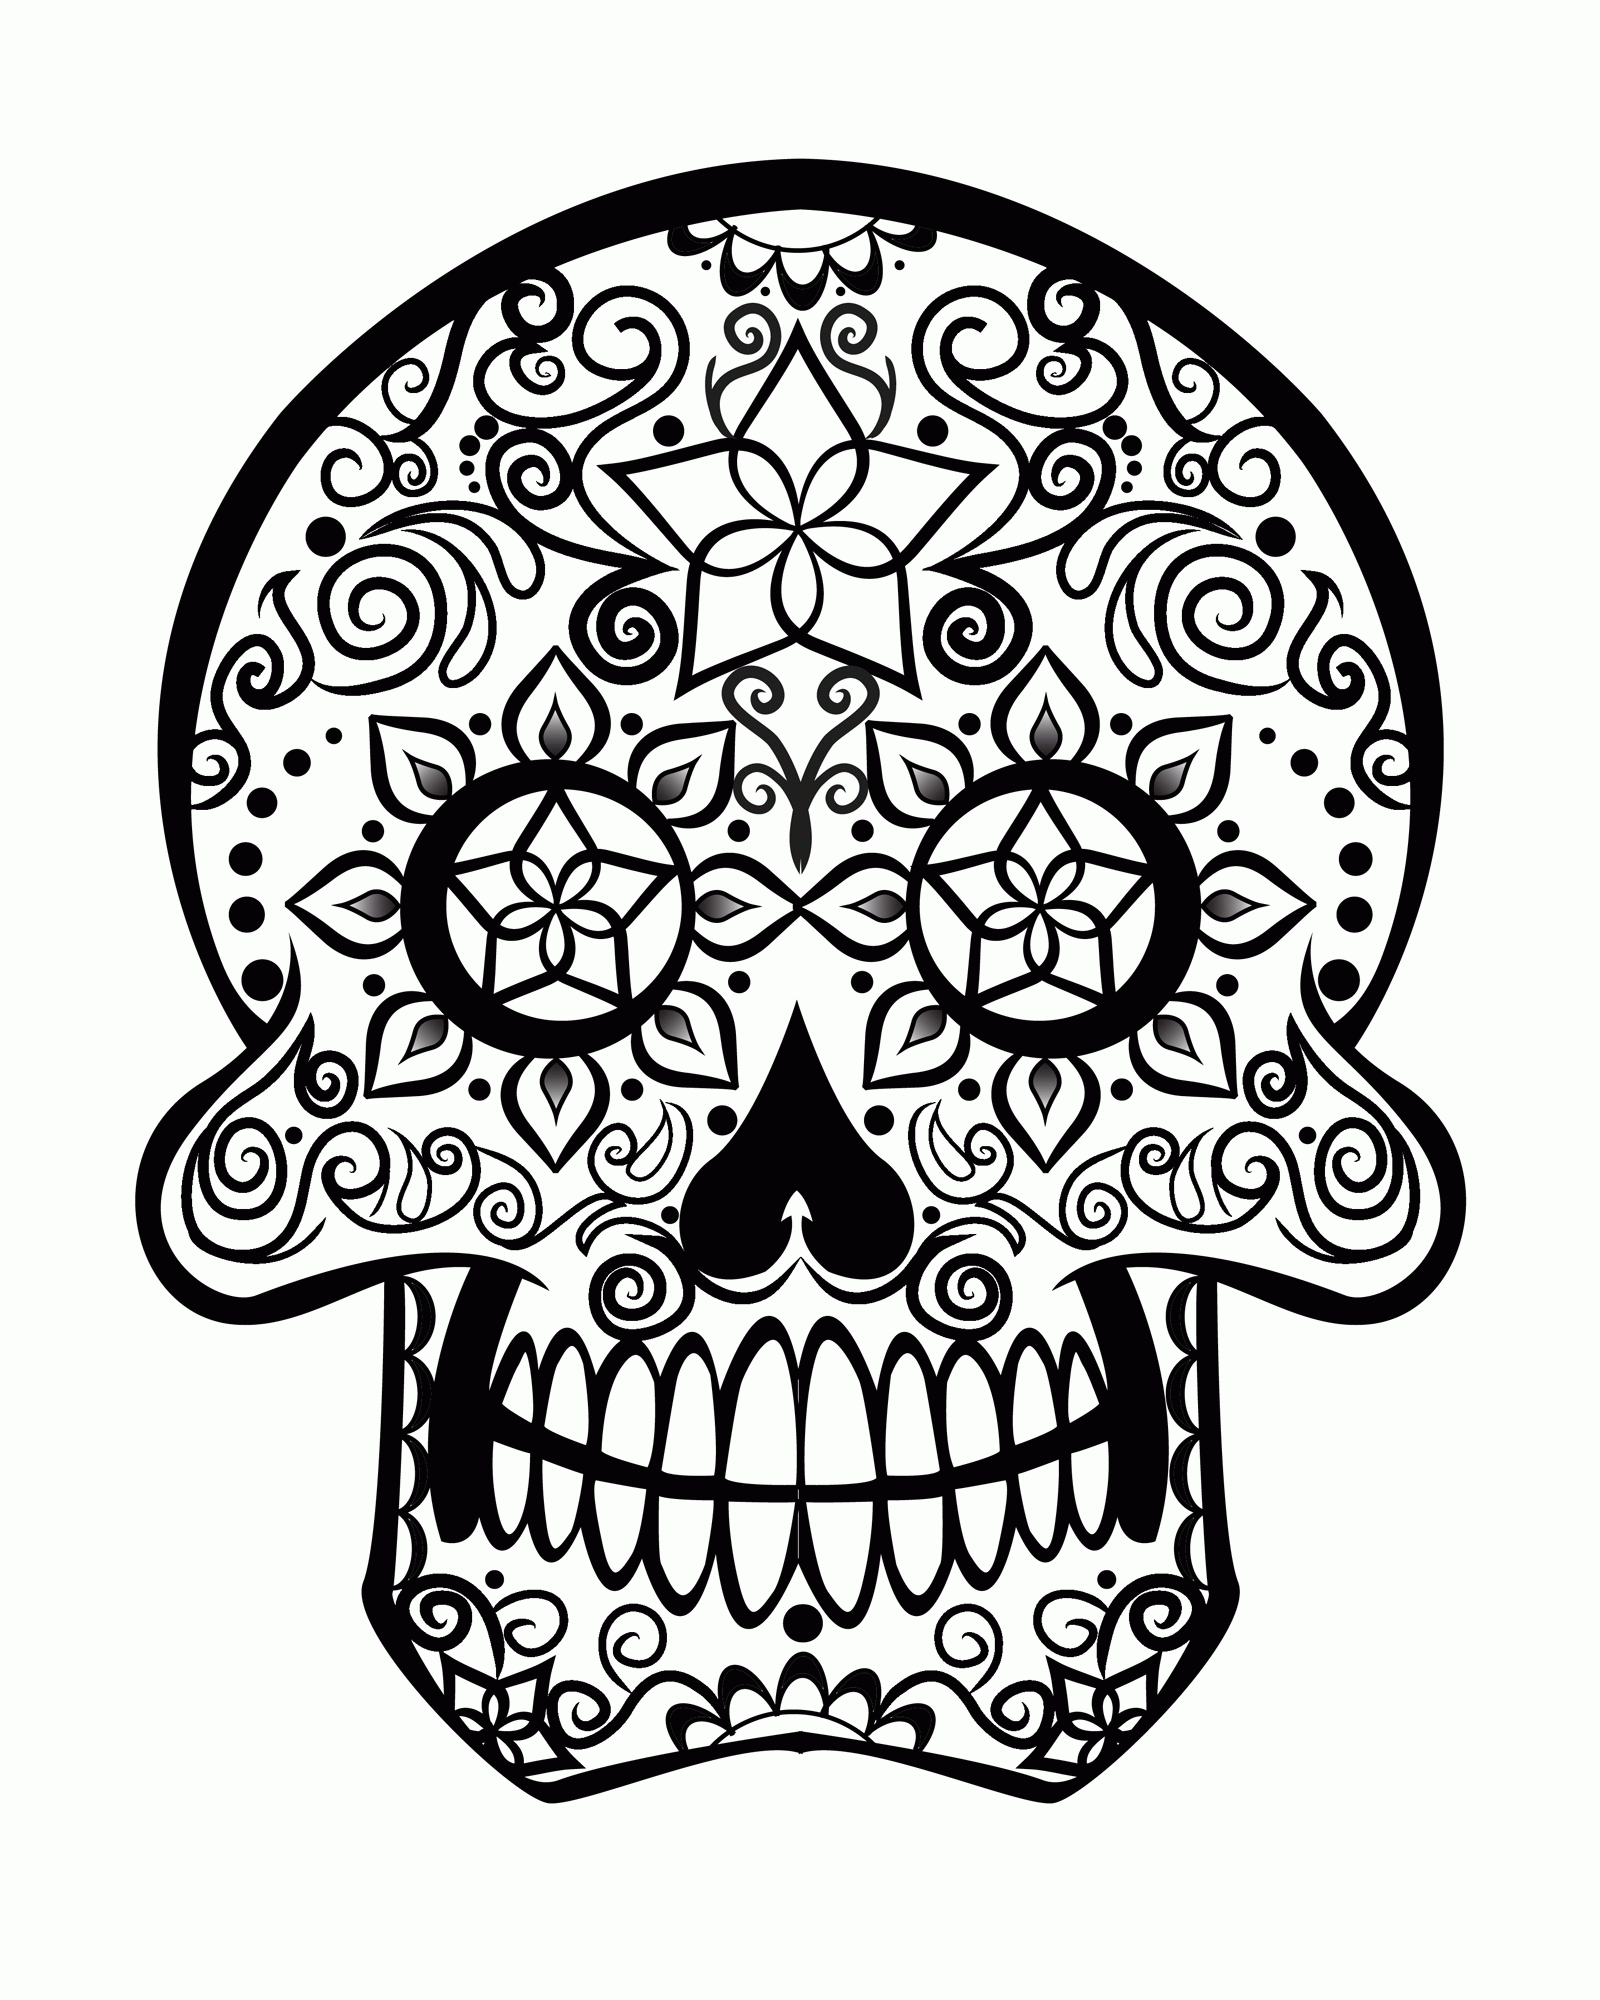 Online Sugar Skull Coloring Page Az Coloring Pages - Widetheme